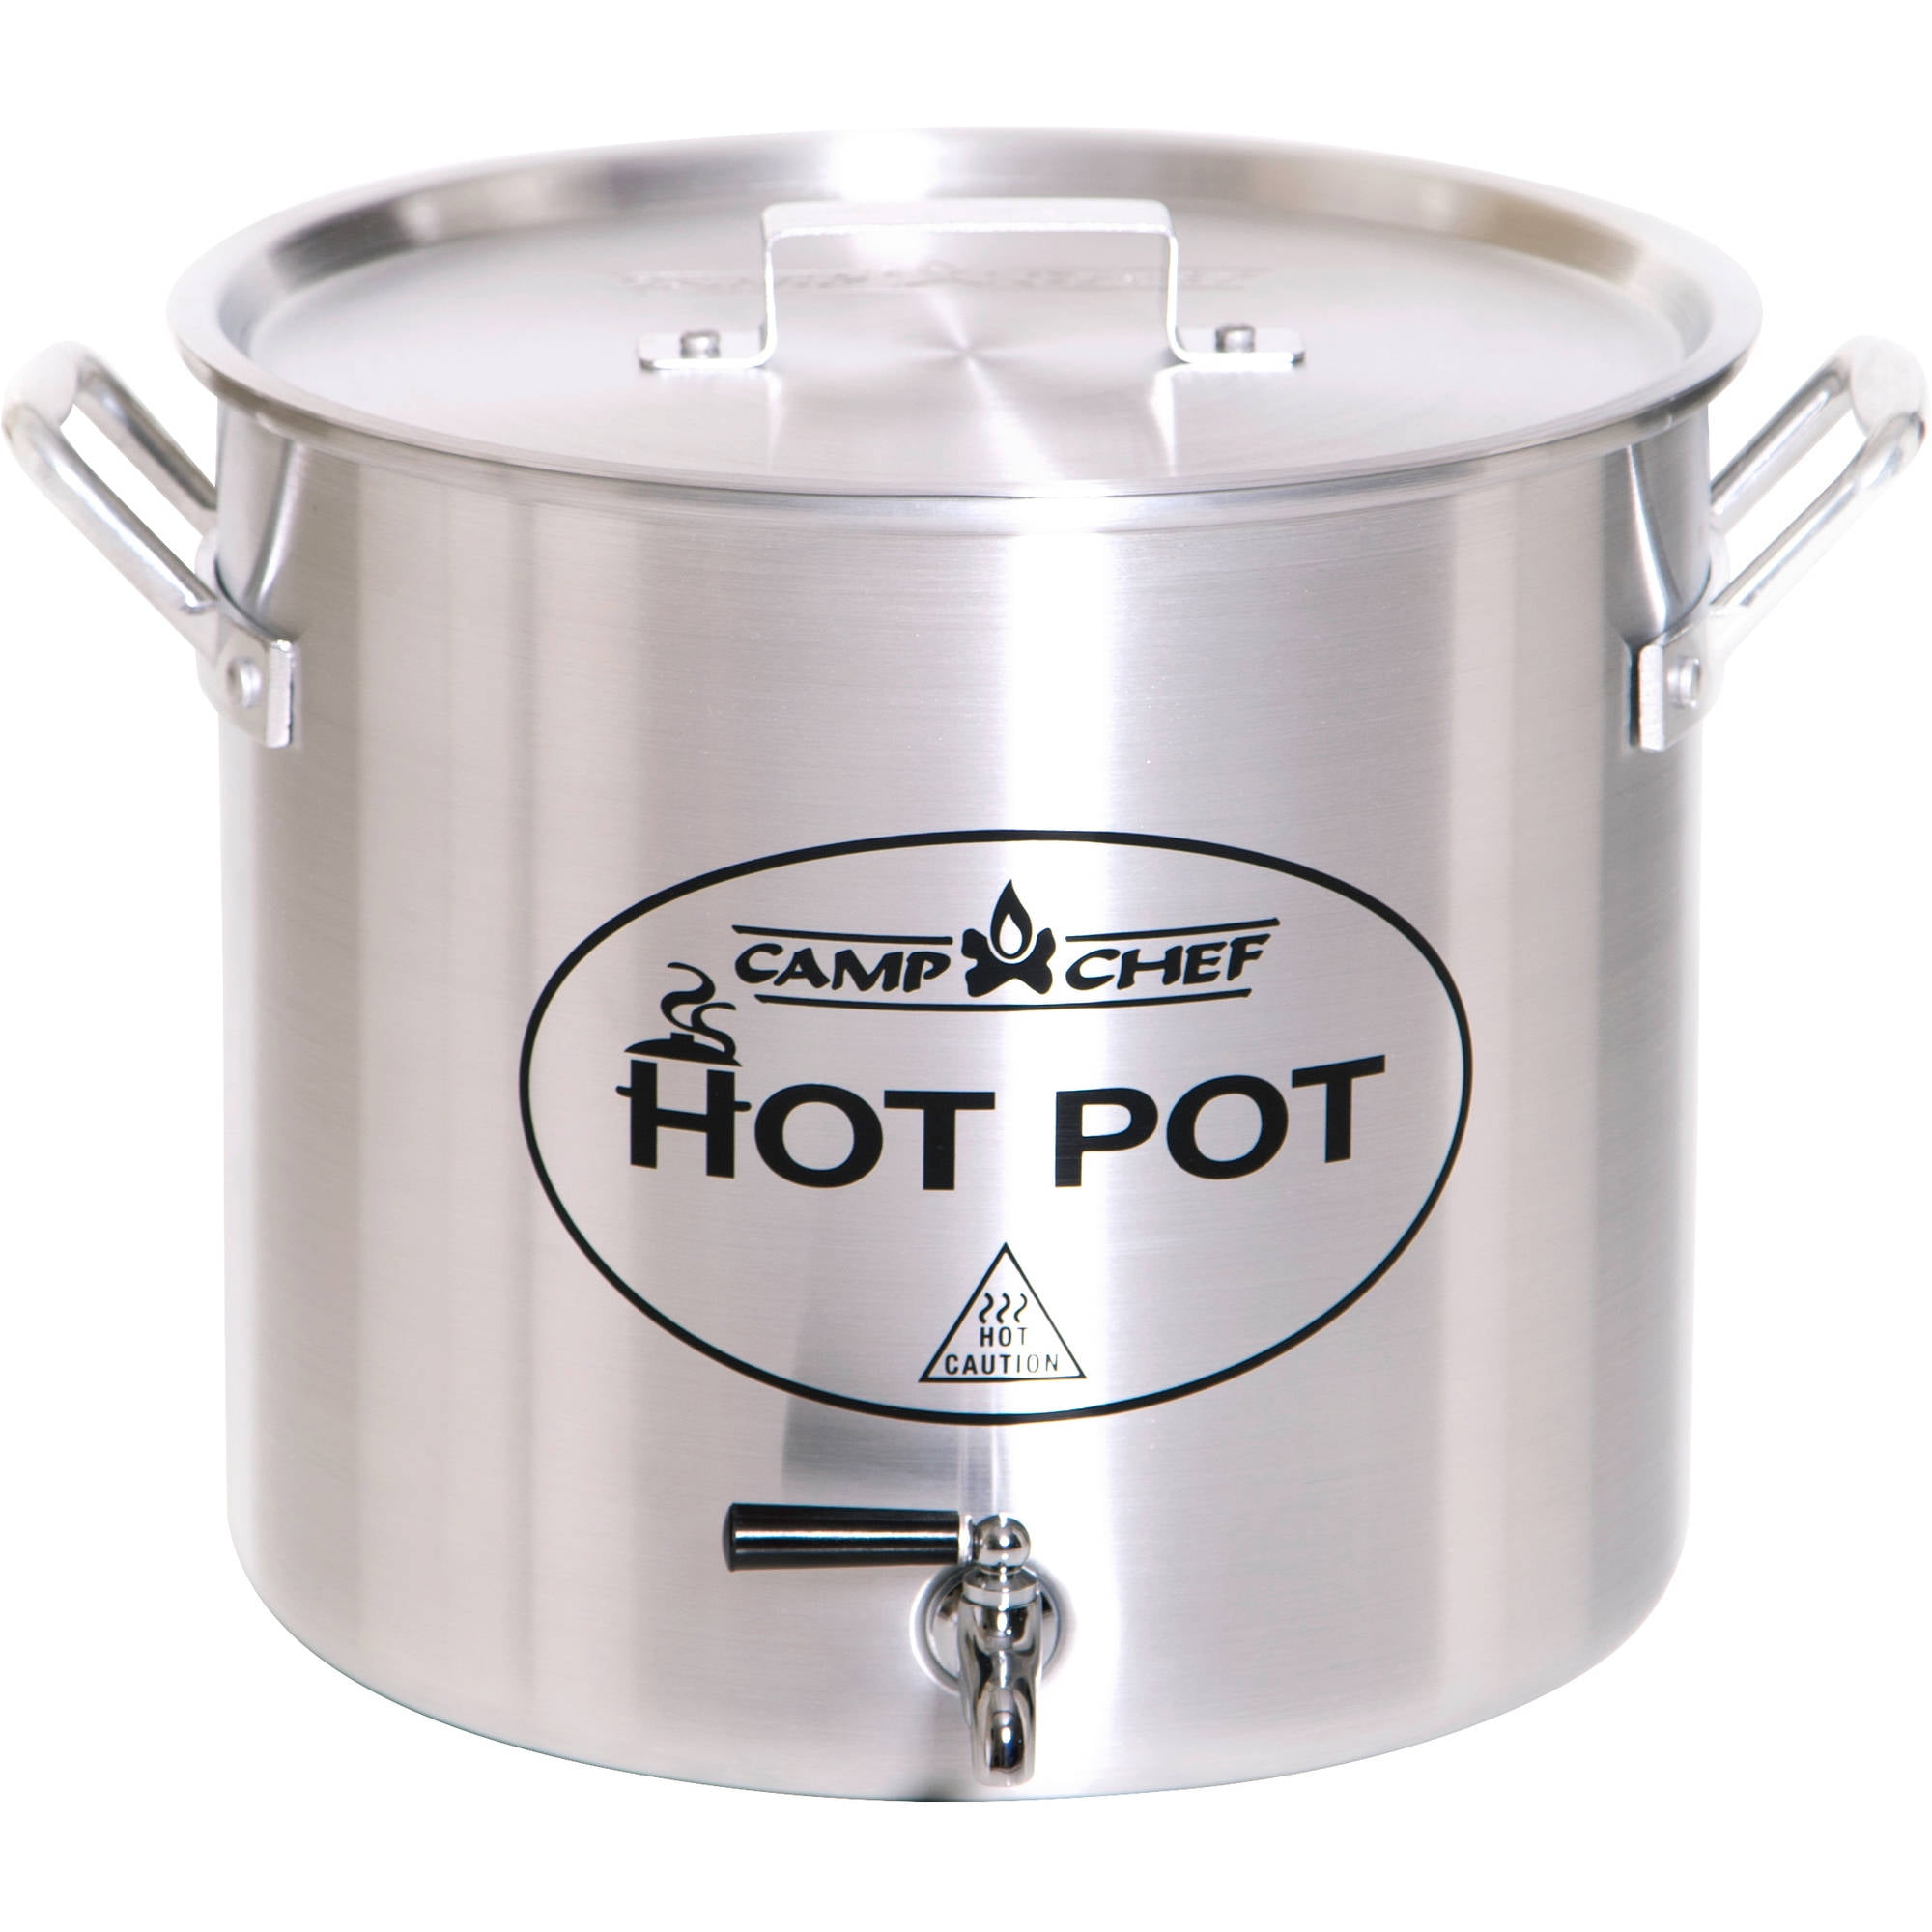 Details about   STANSPORT 358 SOLO I STAINLESS STEEL COOK POT COPPER BOTTOM 5 IN 18 OZ NEW 